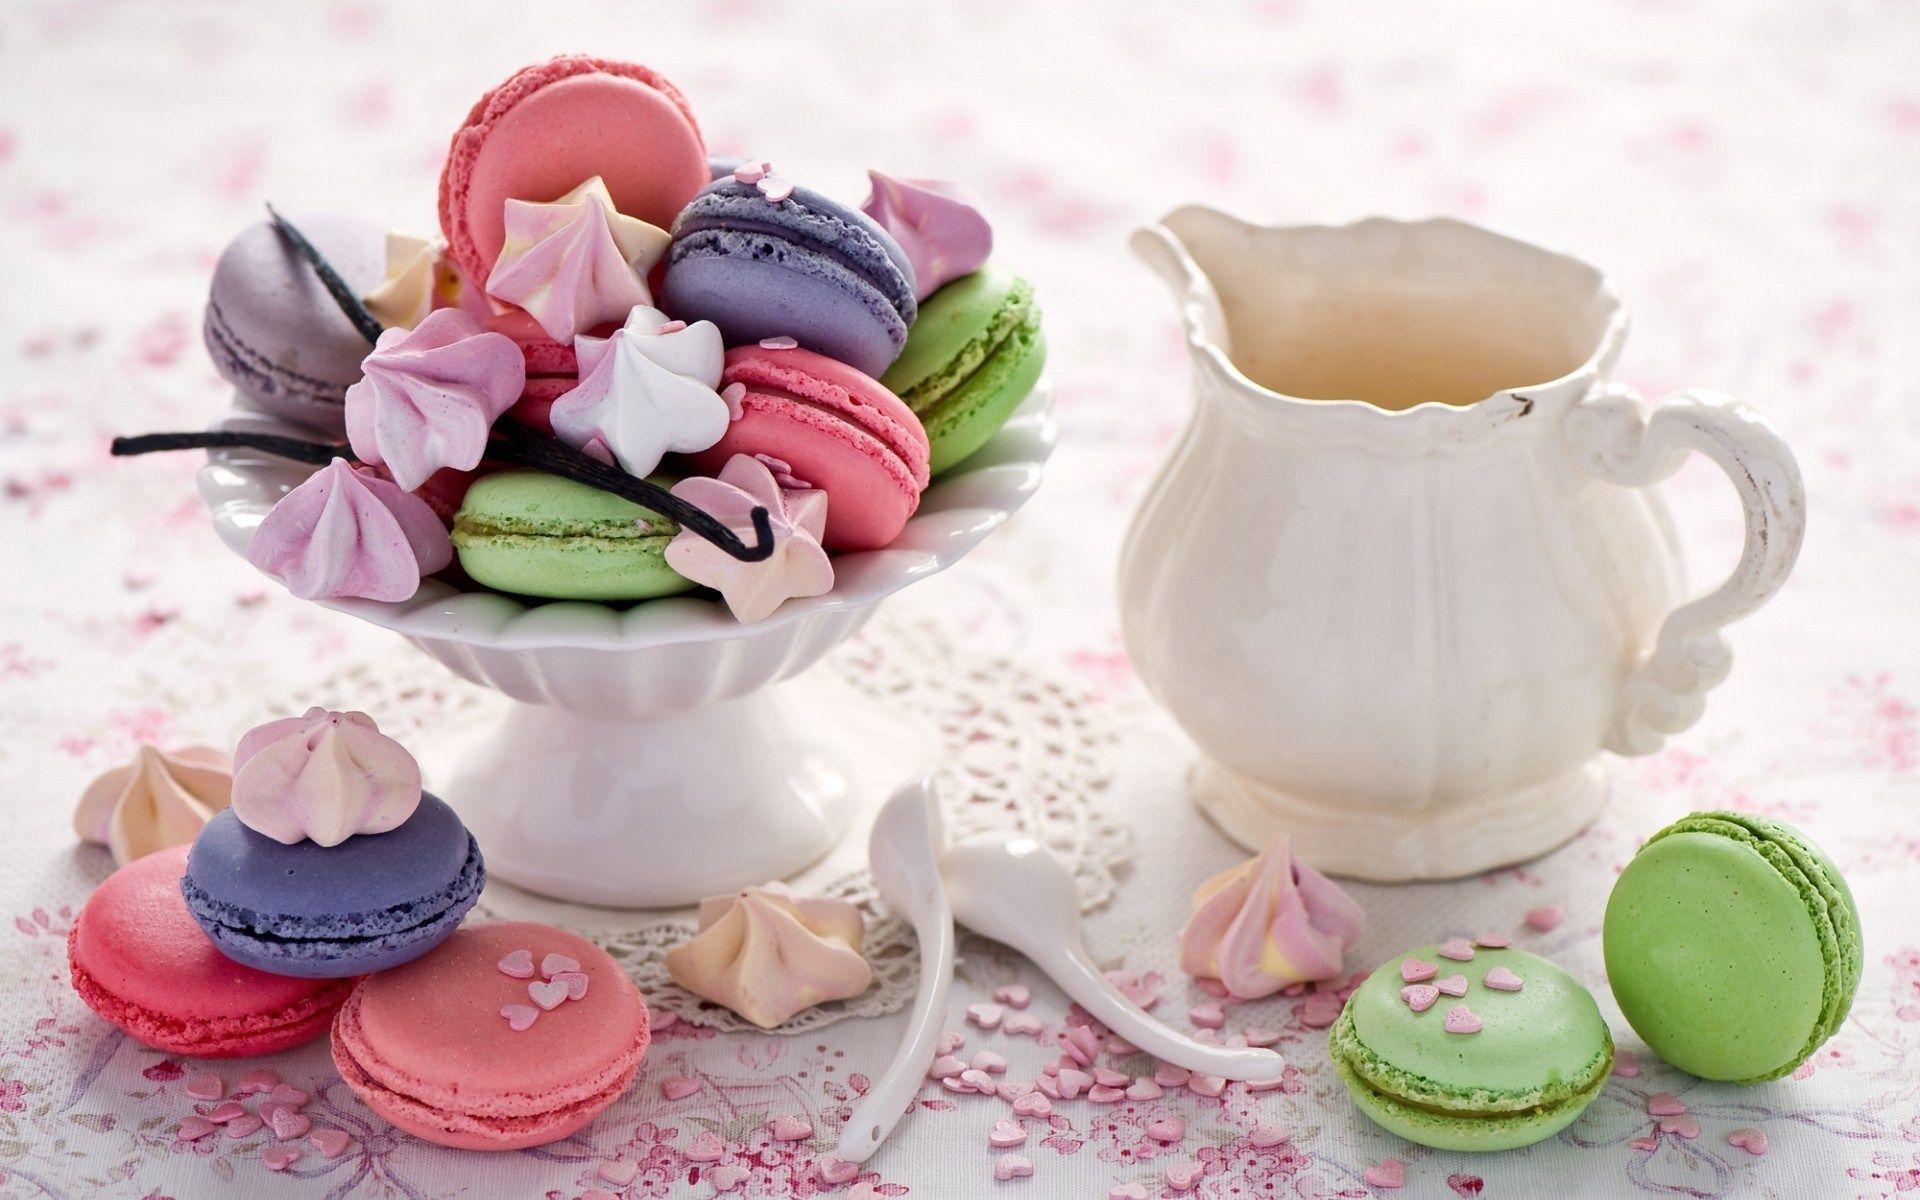 Macaron Wallpaper Android Apps on Google Play 1920×1200 Colorful